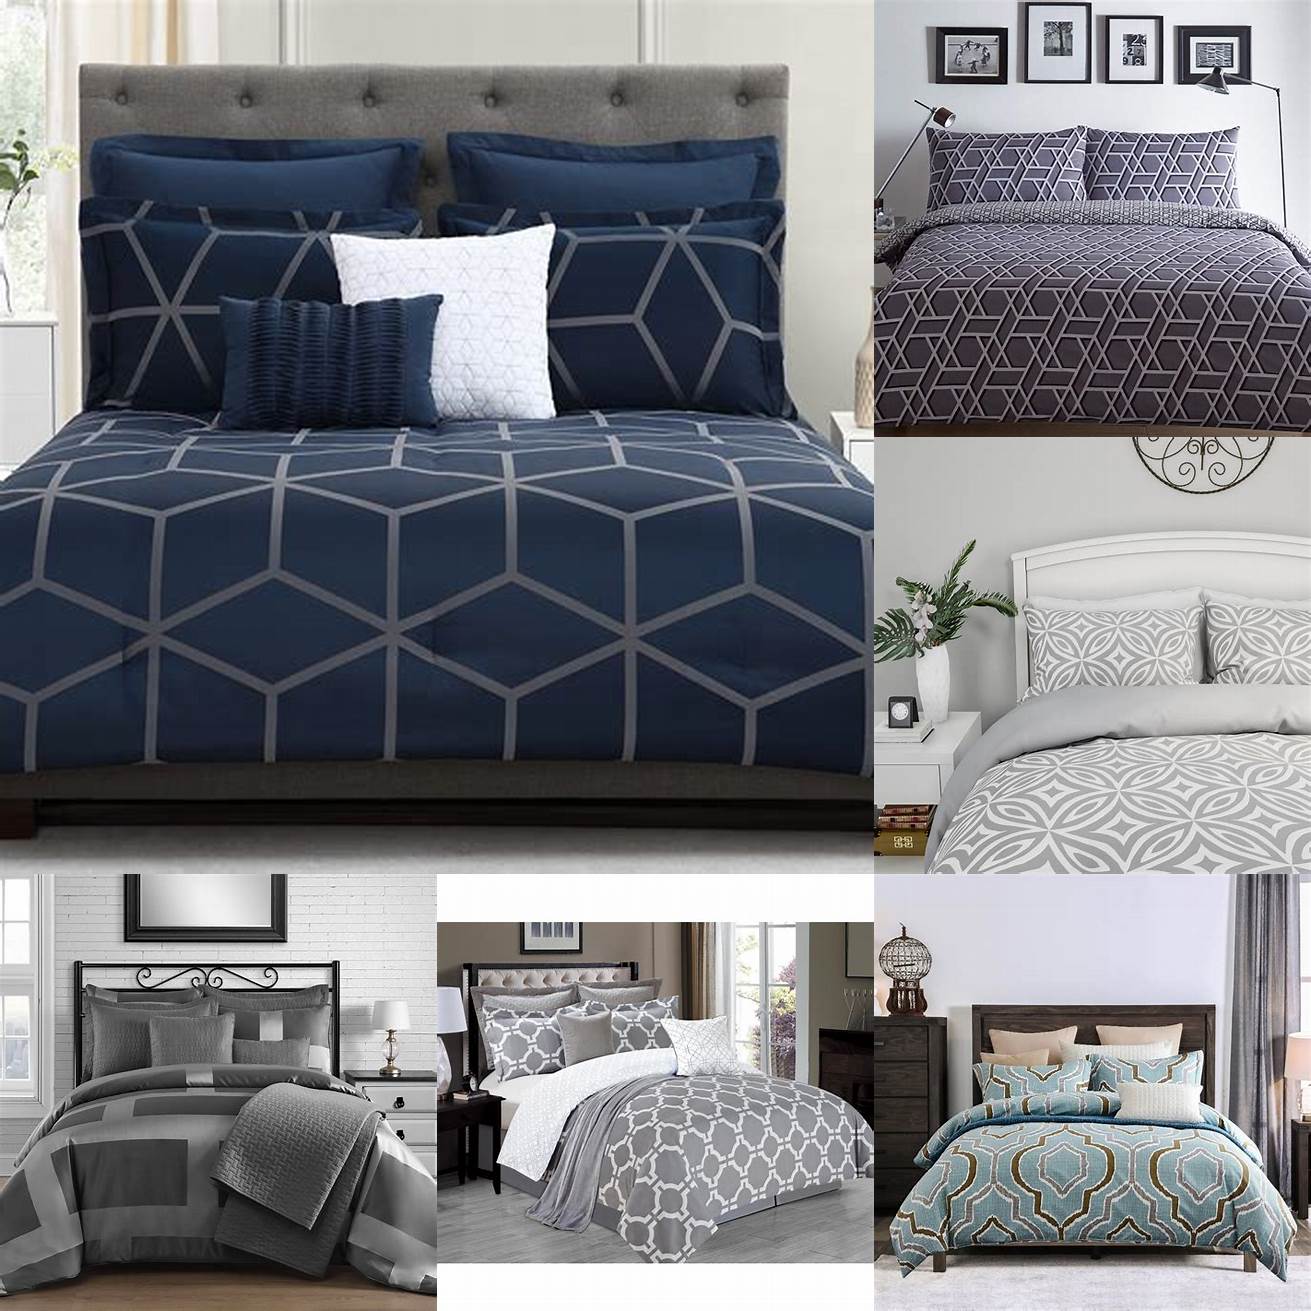 2 A modern Queen Bed Set with bold geometric patterns